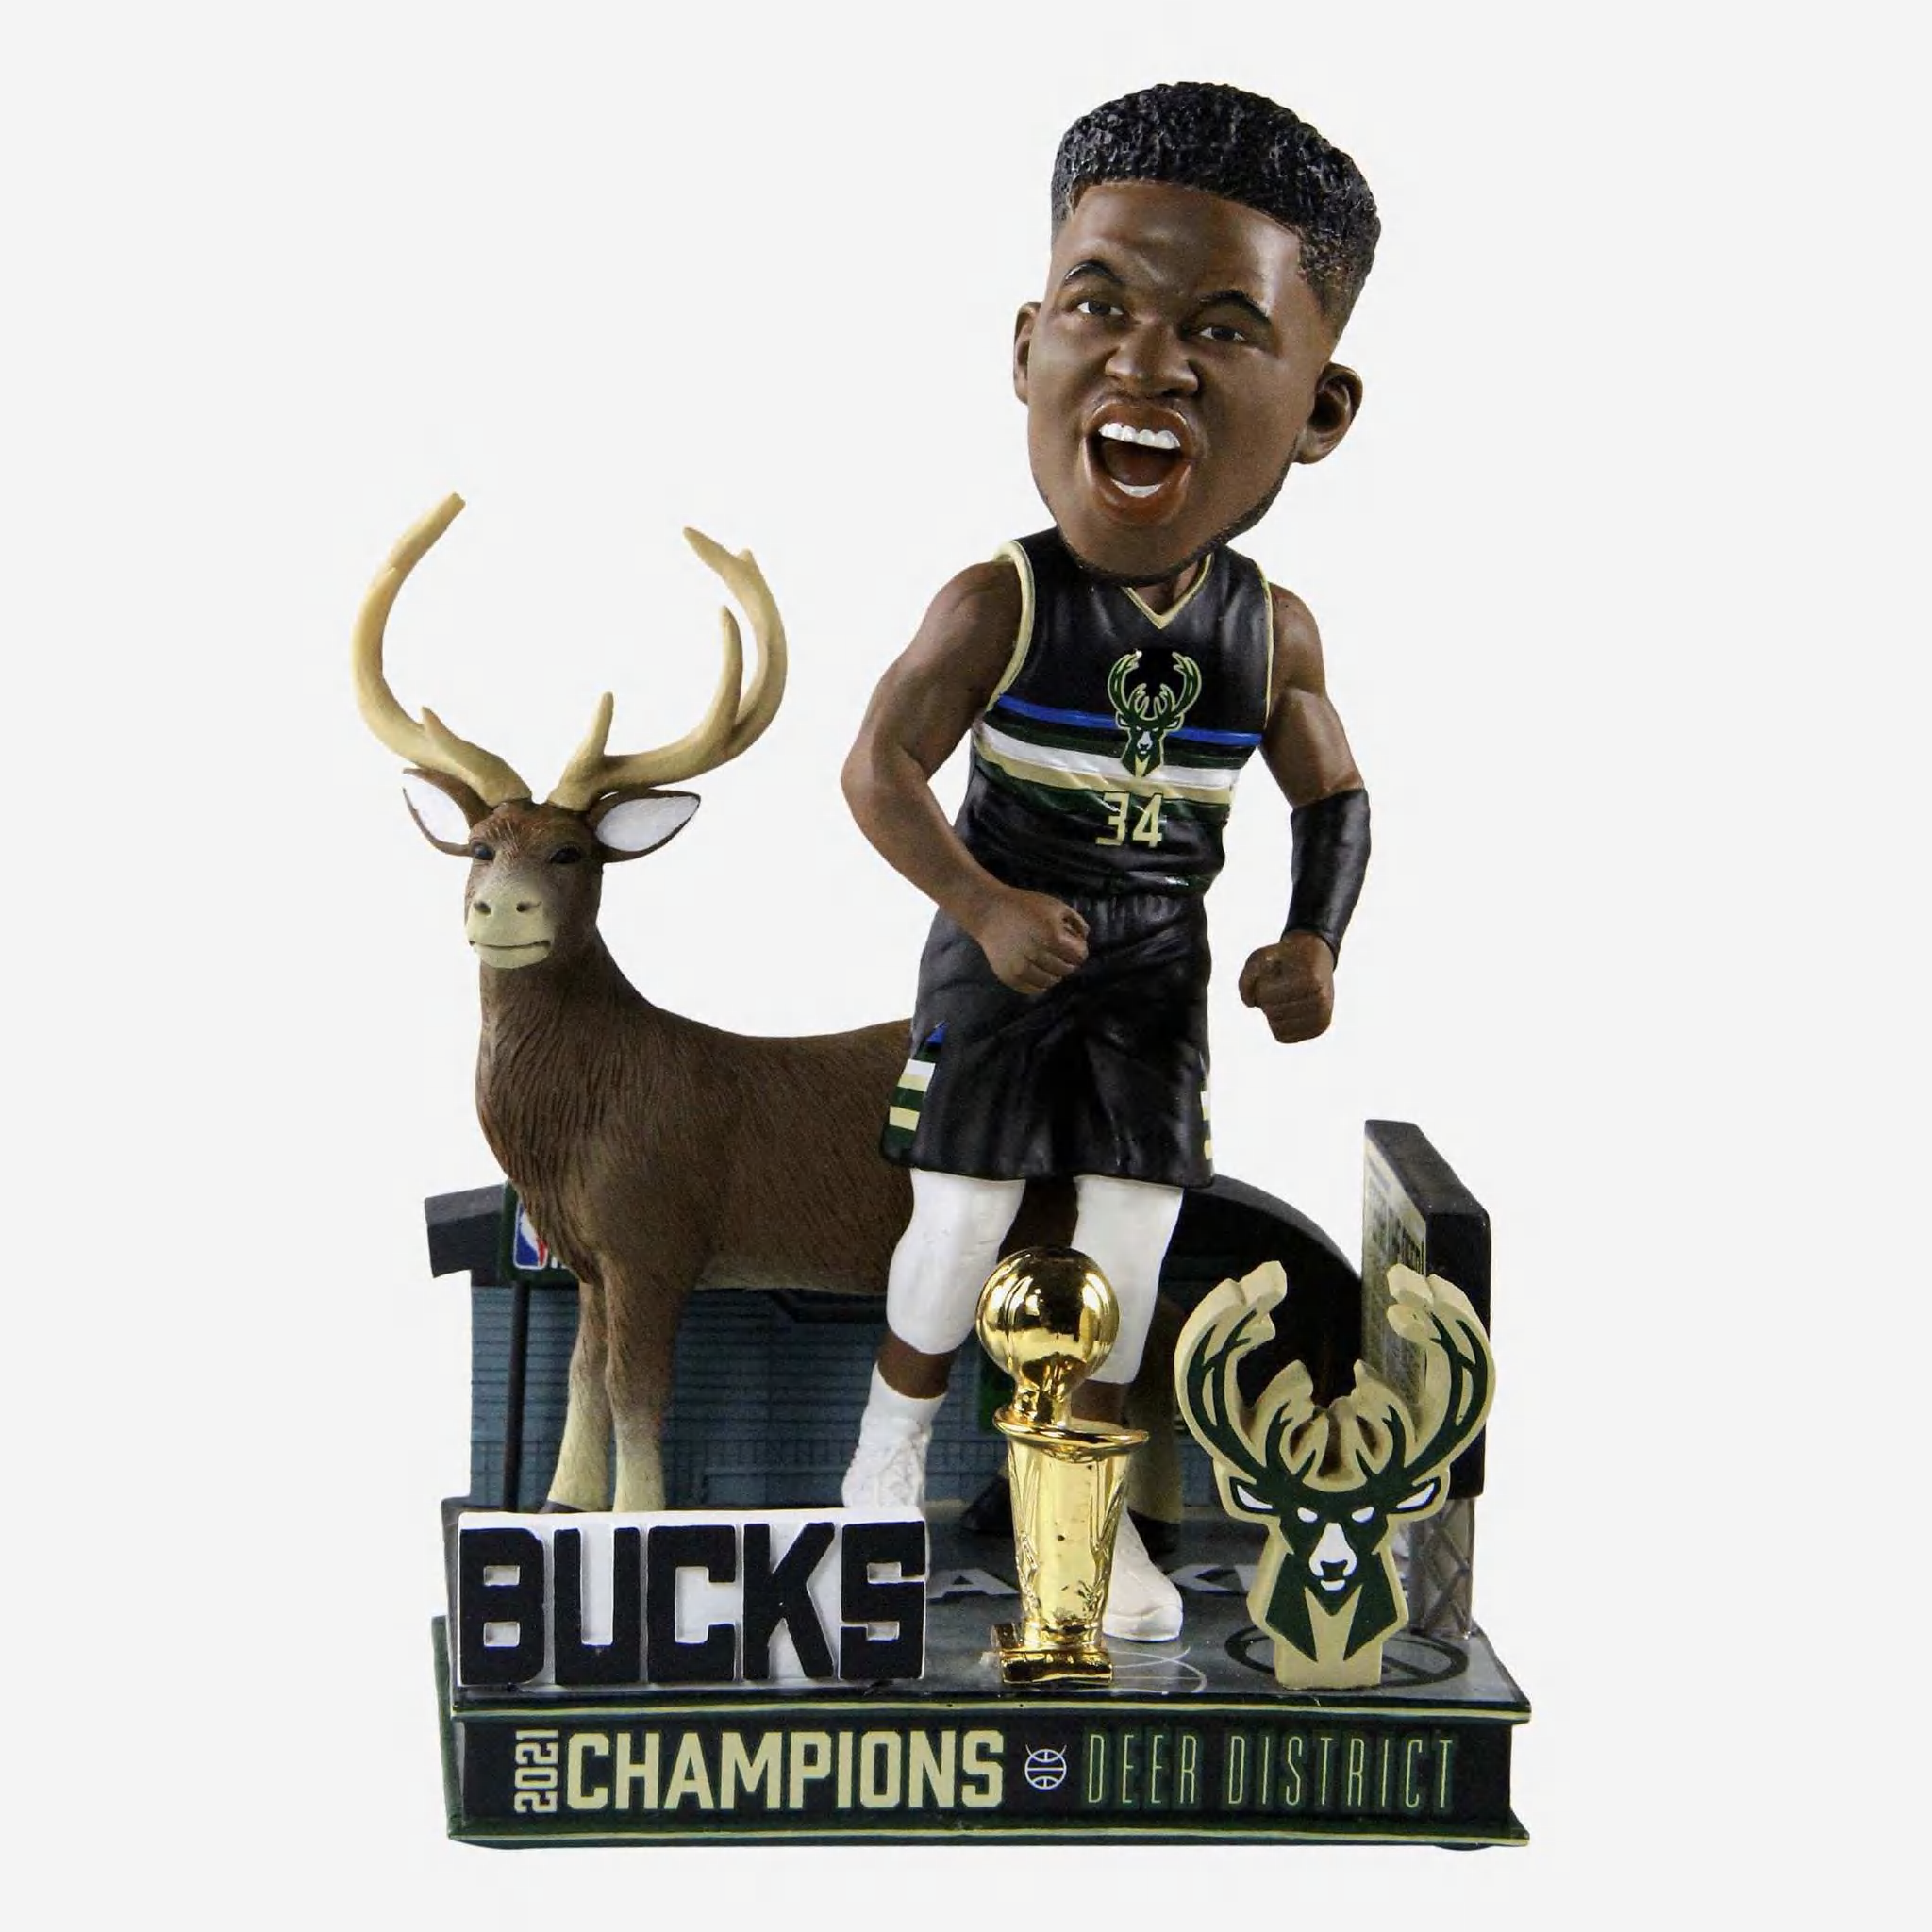 Bucks bobbleheads are up for grabs around the country